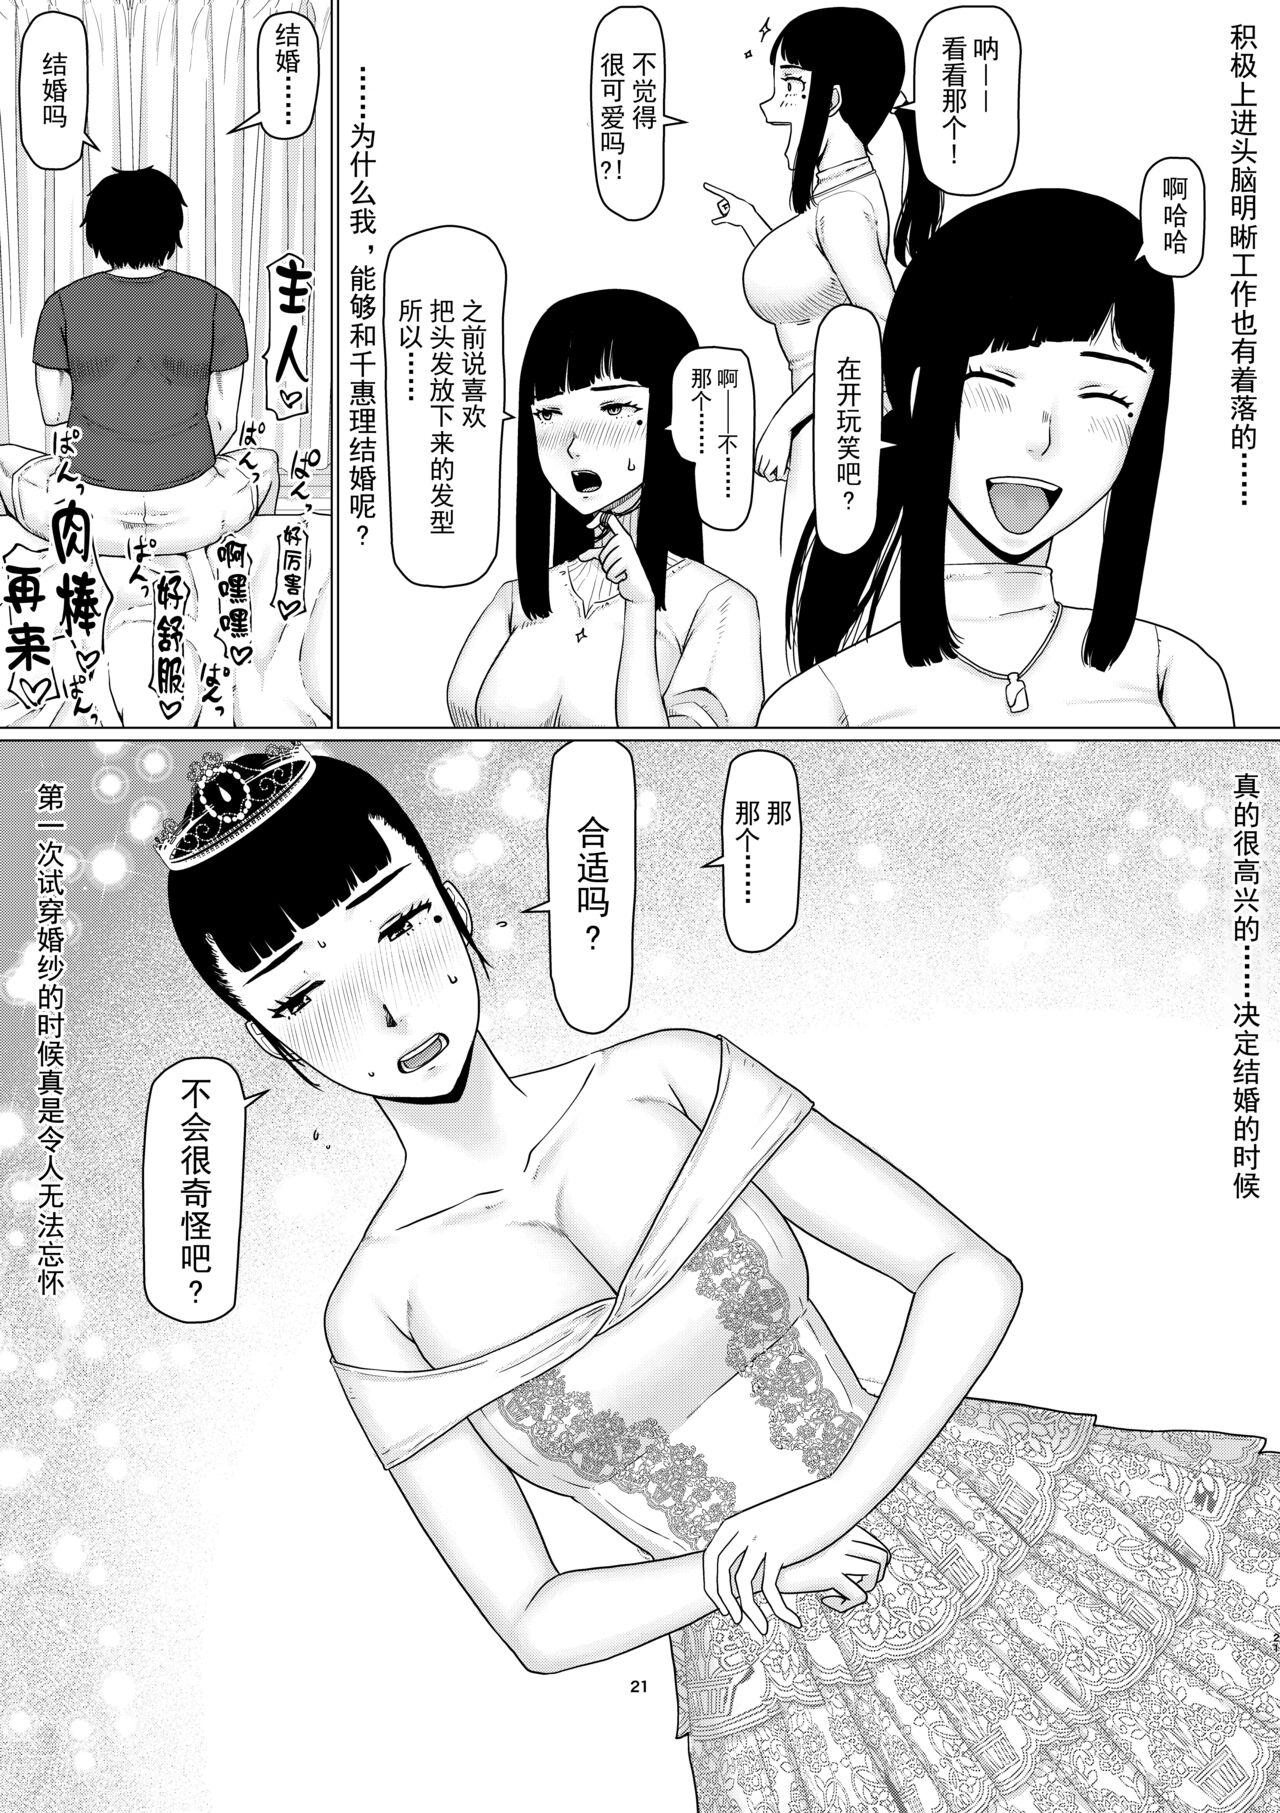 (Dōjinshi) Chieri can't lose!3 -Perverted toilet wife who fertilizes anyone's sperm with her husband's approval- Volume 1 (Original) [Chinese][超勇漢化組] 22